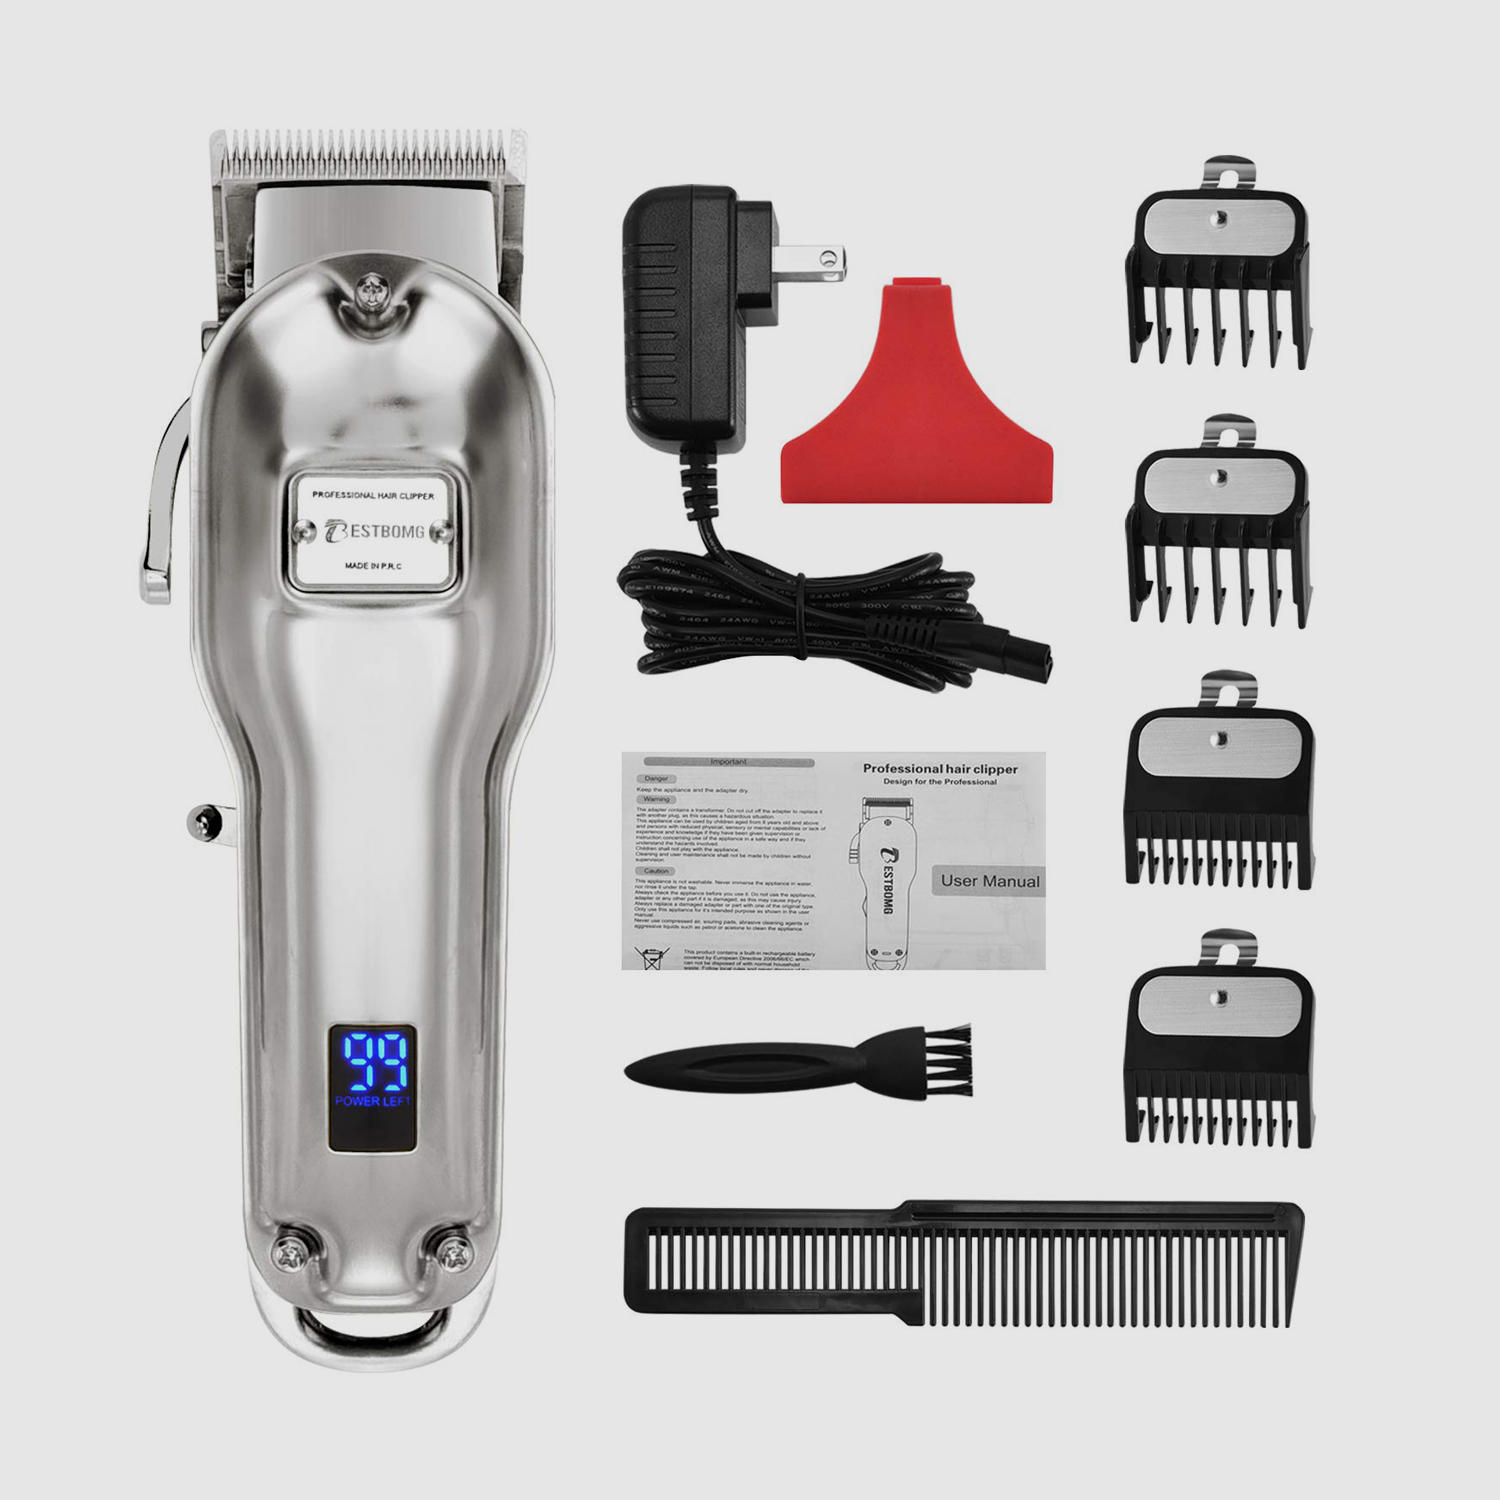 Hair Clippers LED Display Stainless Steel Metal Housing Heavy-Duty Motor - 0